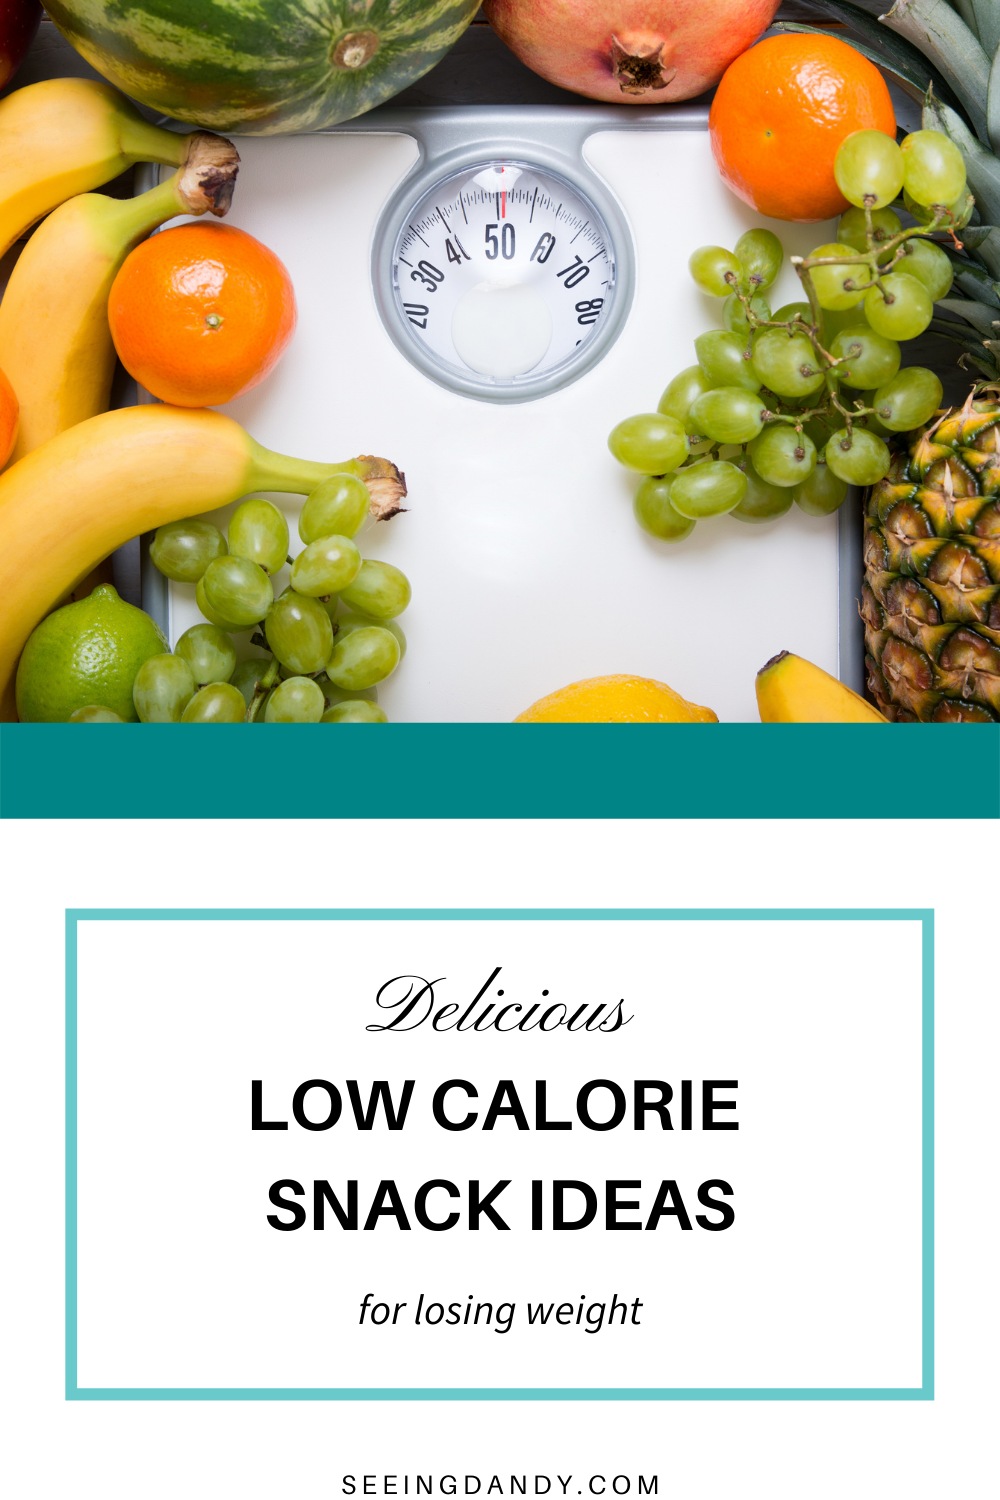 low calorie snack ideas, white bathroom scale, fruit bowl, pineapple, limes, bananas, oranges, green grapes, healthy recipes, losing weight, watermelon, pomegranate